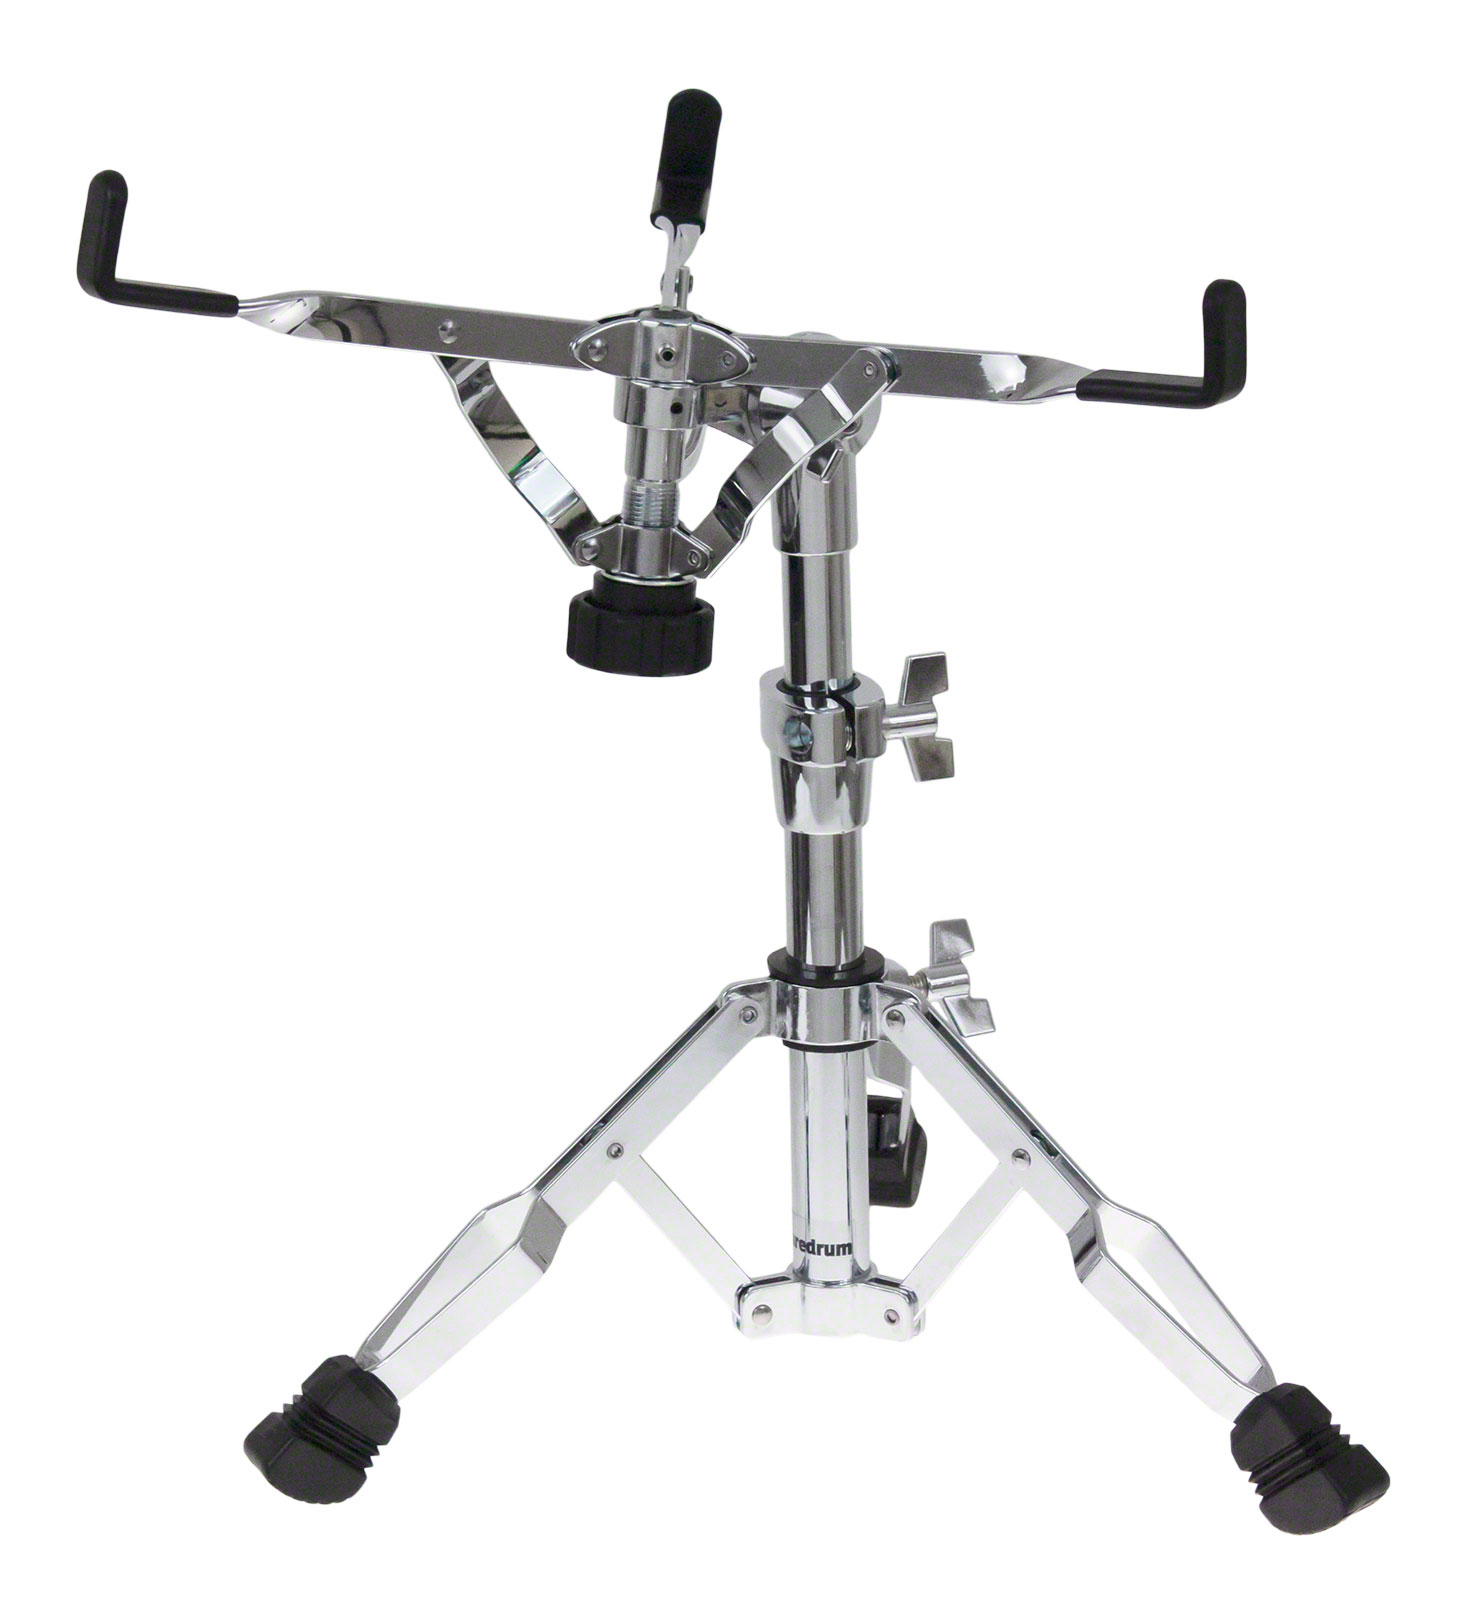 SPAREDRUM HSS1 - SNARE DRUM STAND DOUBLE-BRACED LEGS